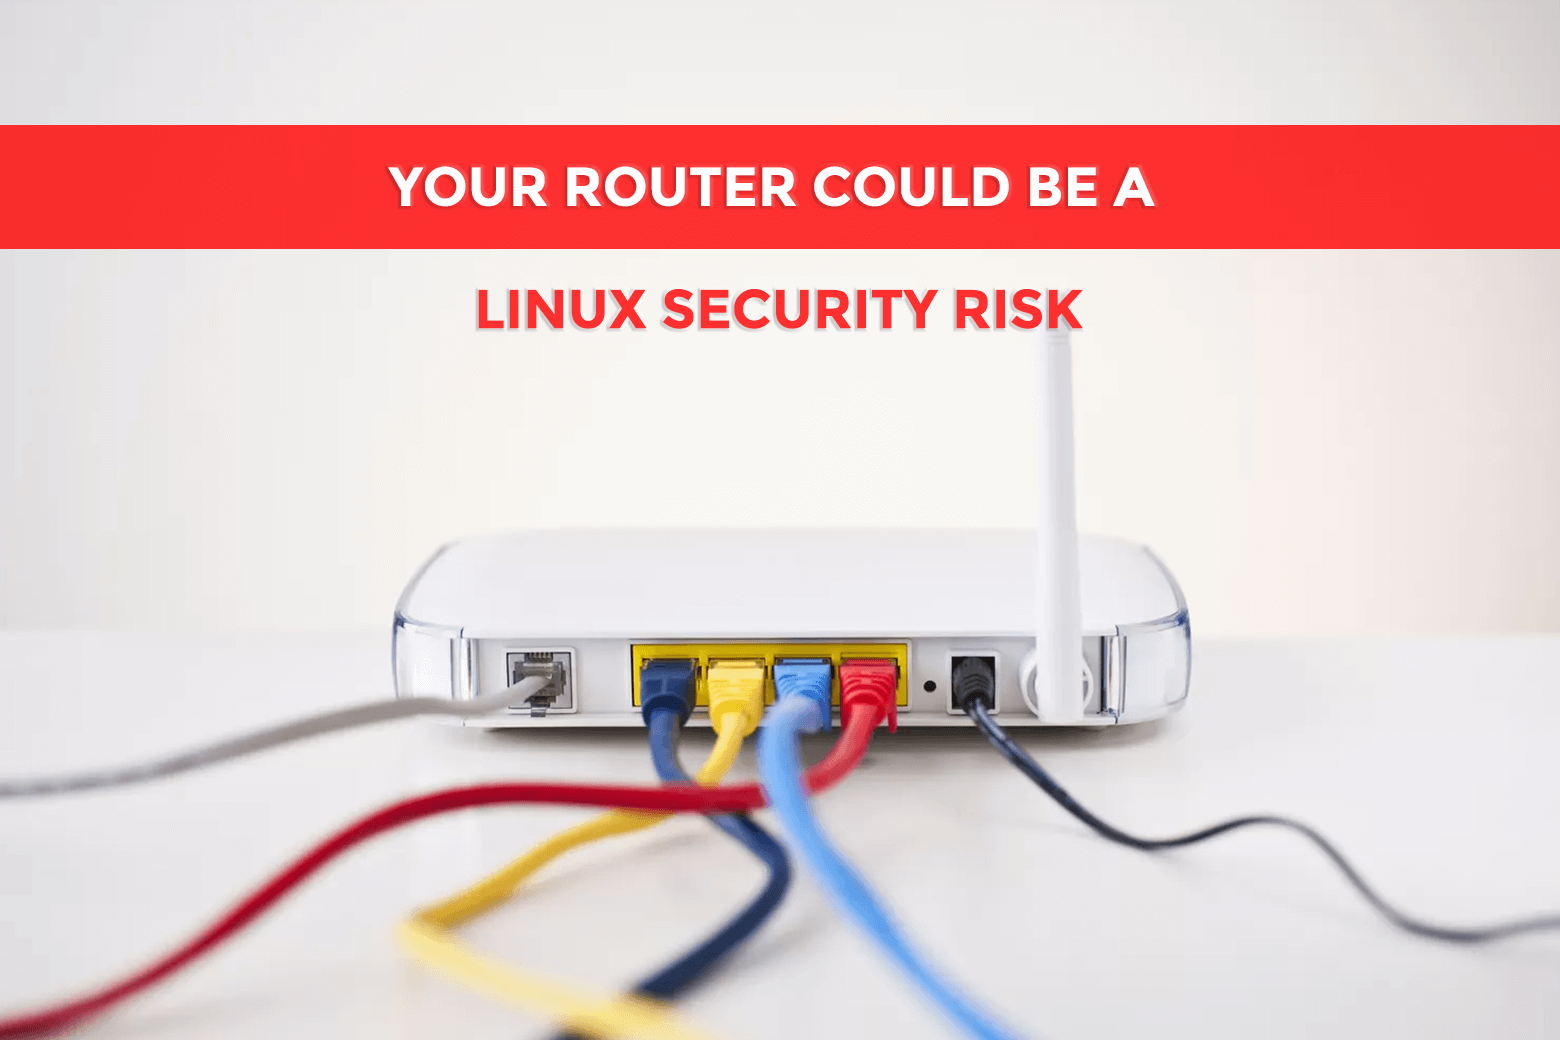 Your Router Could Be a Linux Security Risk